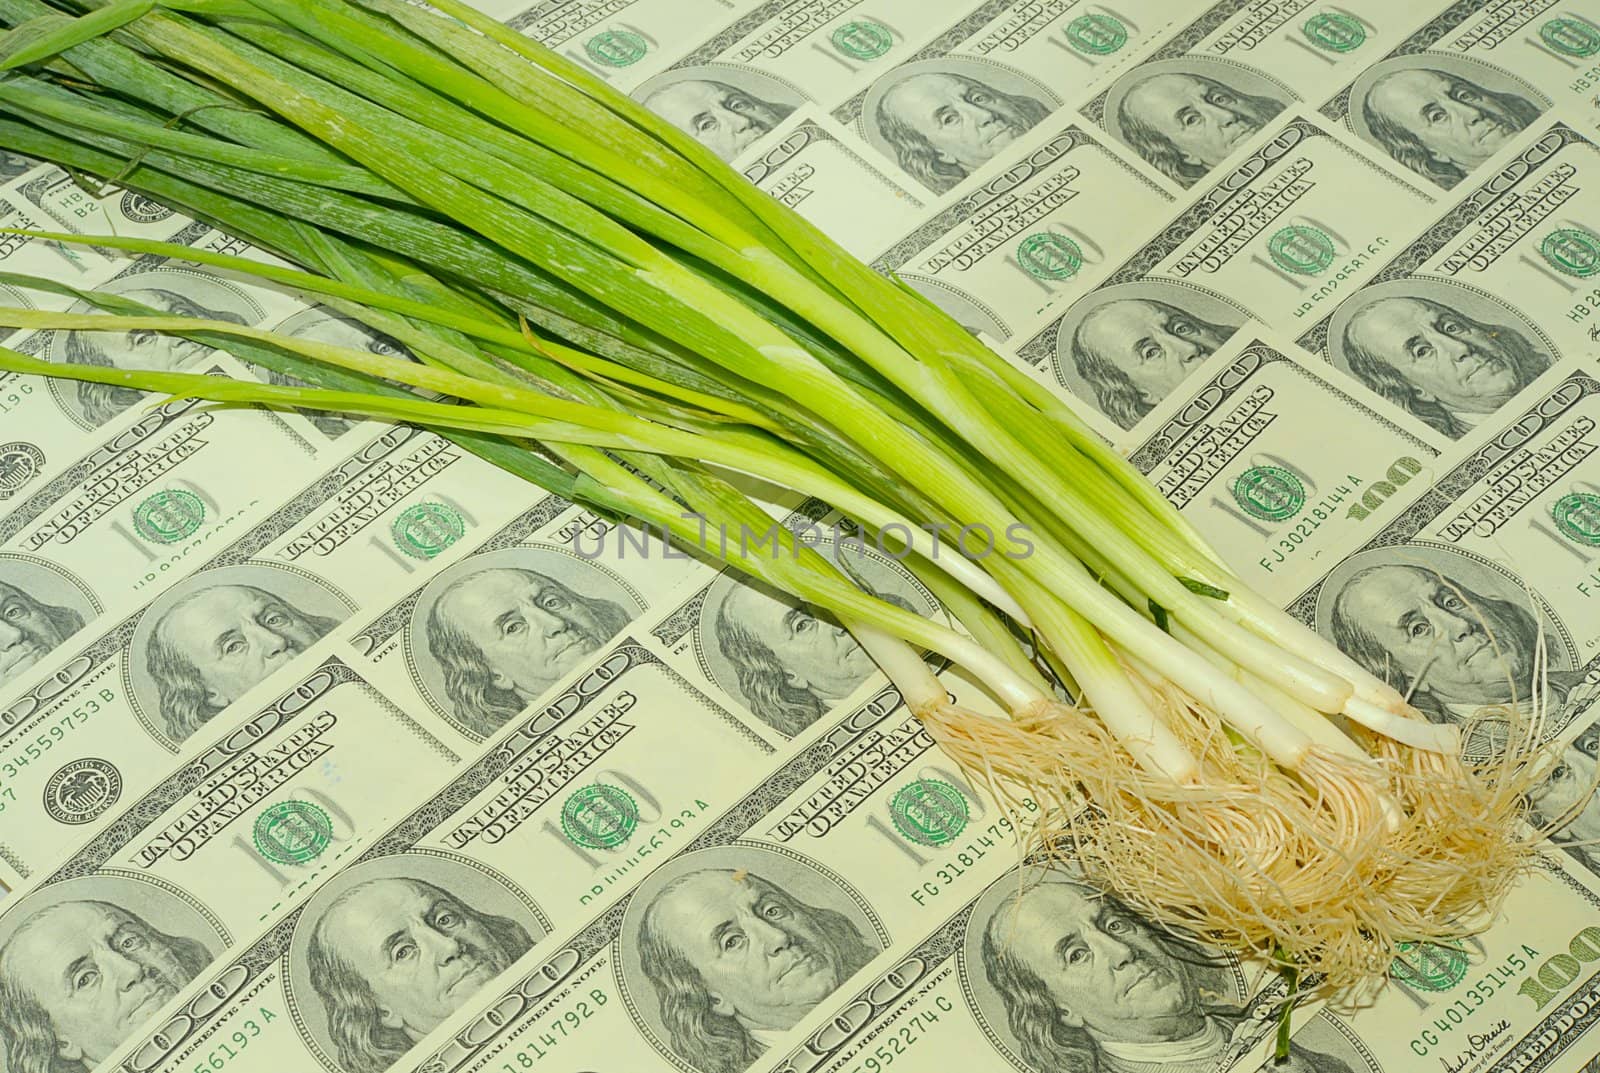 Spring Onions On The One Hundred Dollar Bills Background.